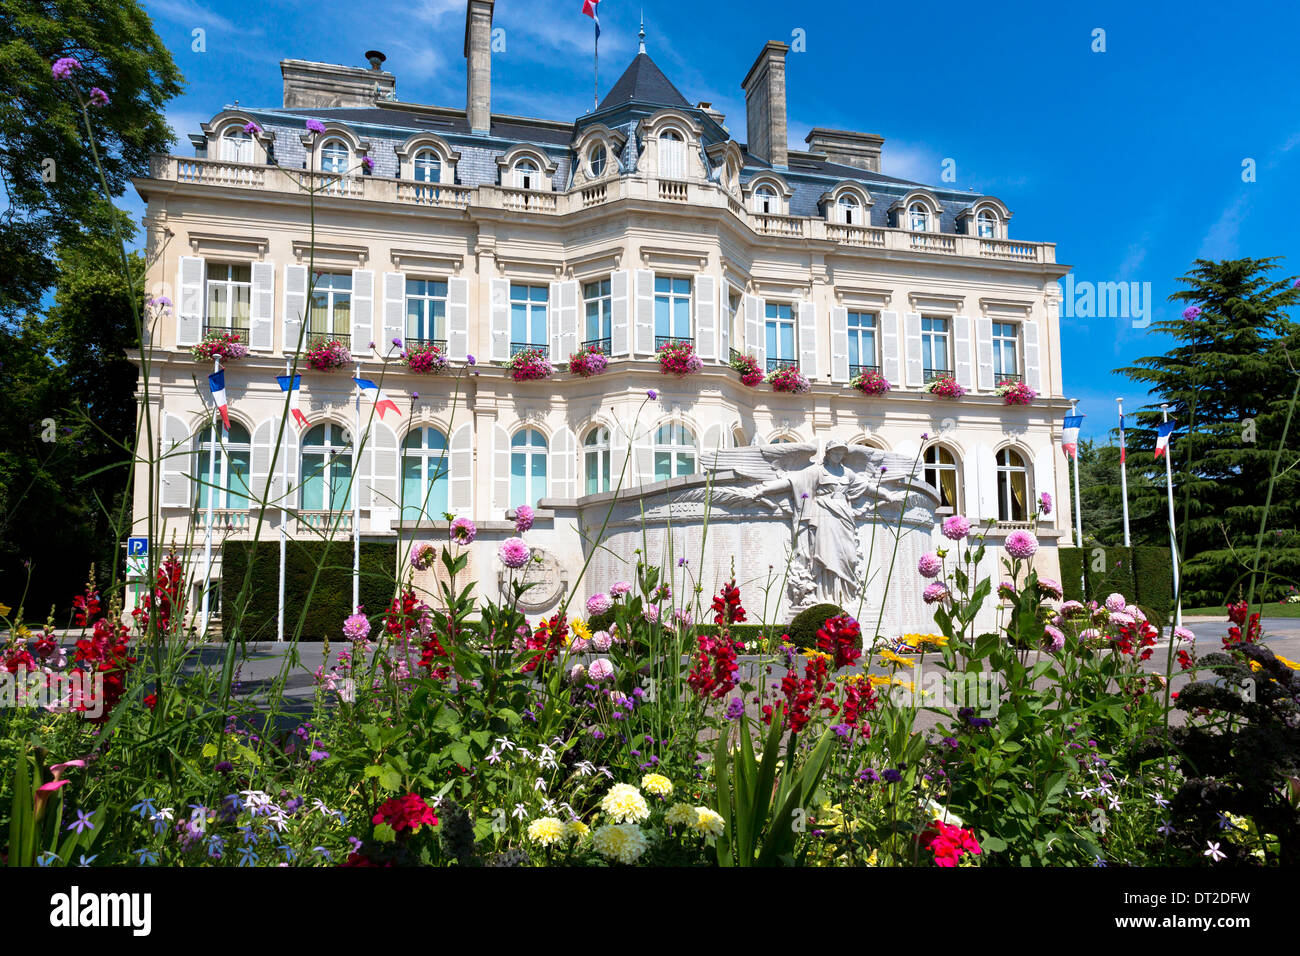 Hotel de Ville town hall in Avenue de Champagne, Epernay, Champagne-Ardenne, France Stock Photo